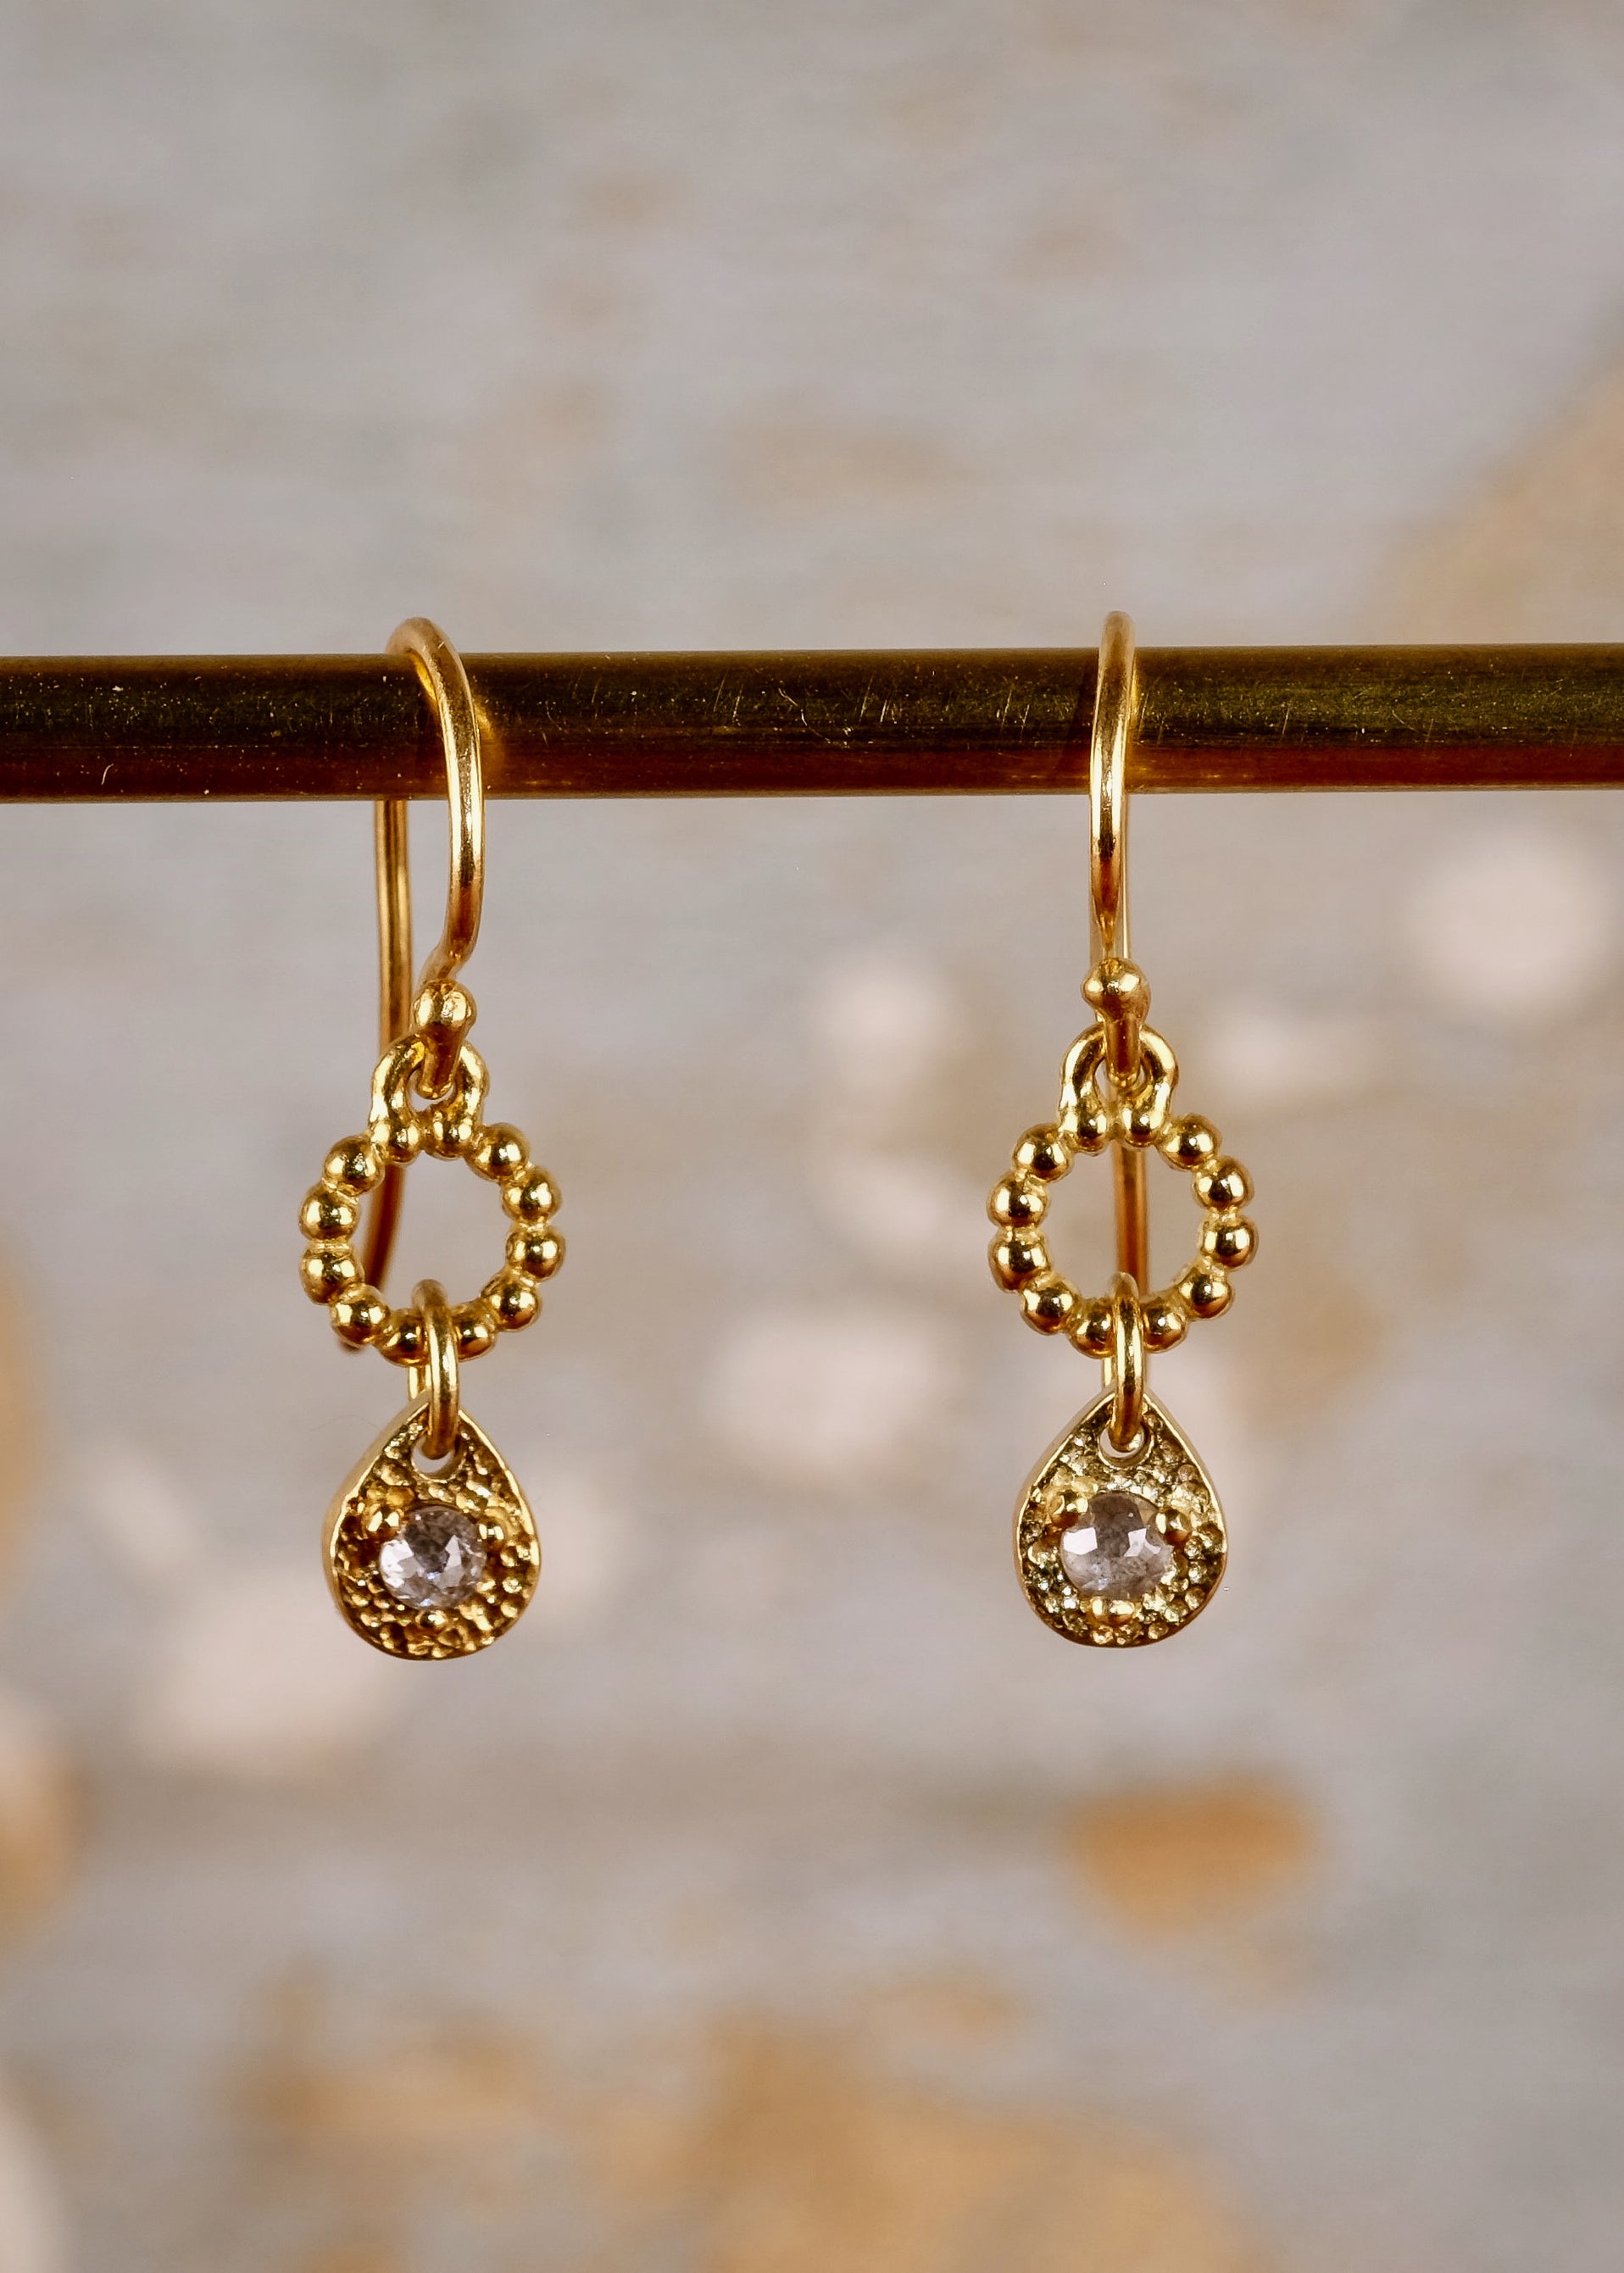 A romantic journey that transcends time. The Drop earring merges a circle of understated gold beads with ornate rose cut diamonds for a dangling romantic style that feels as at home today as it does in an antique jewelry box. 